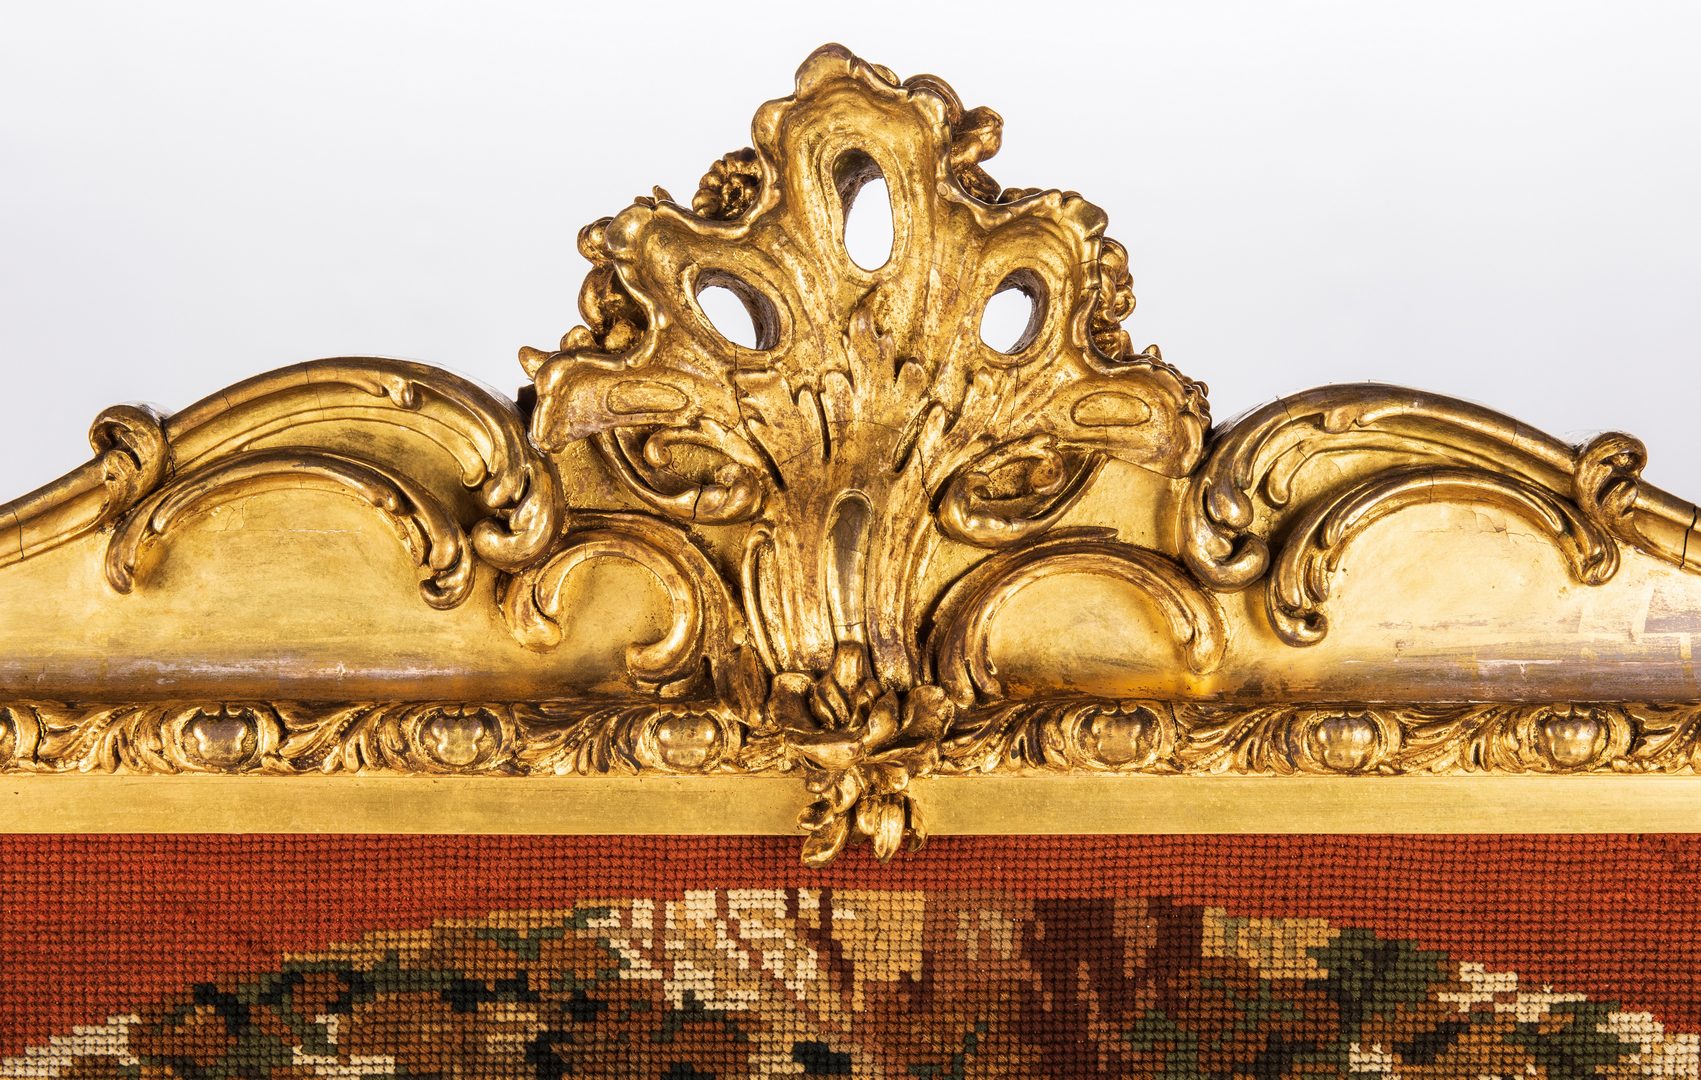 Lot 431: French Rococo Style Giltwood Tapestry Firescreen